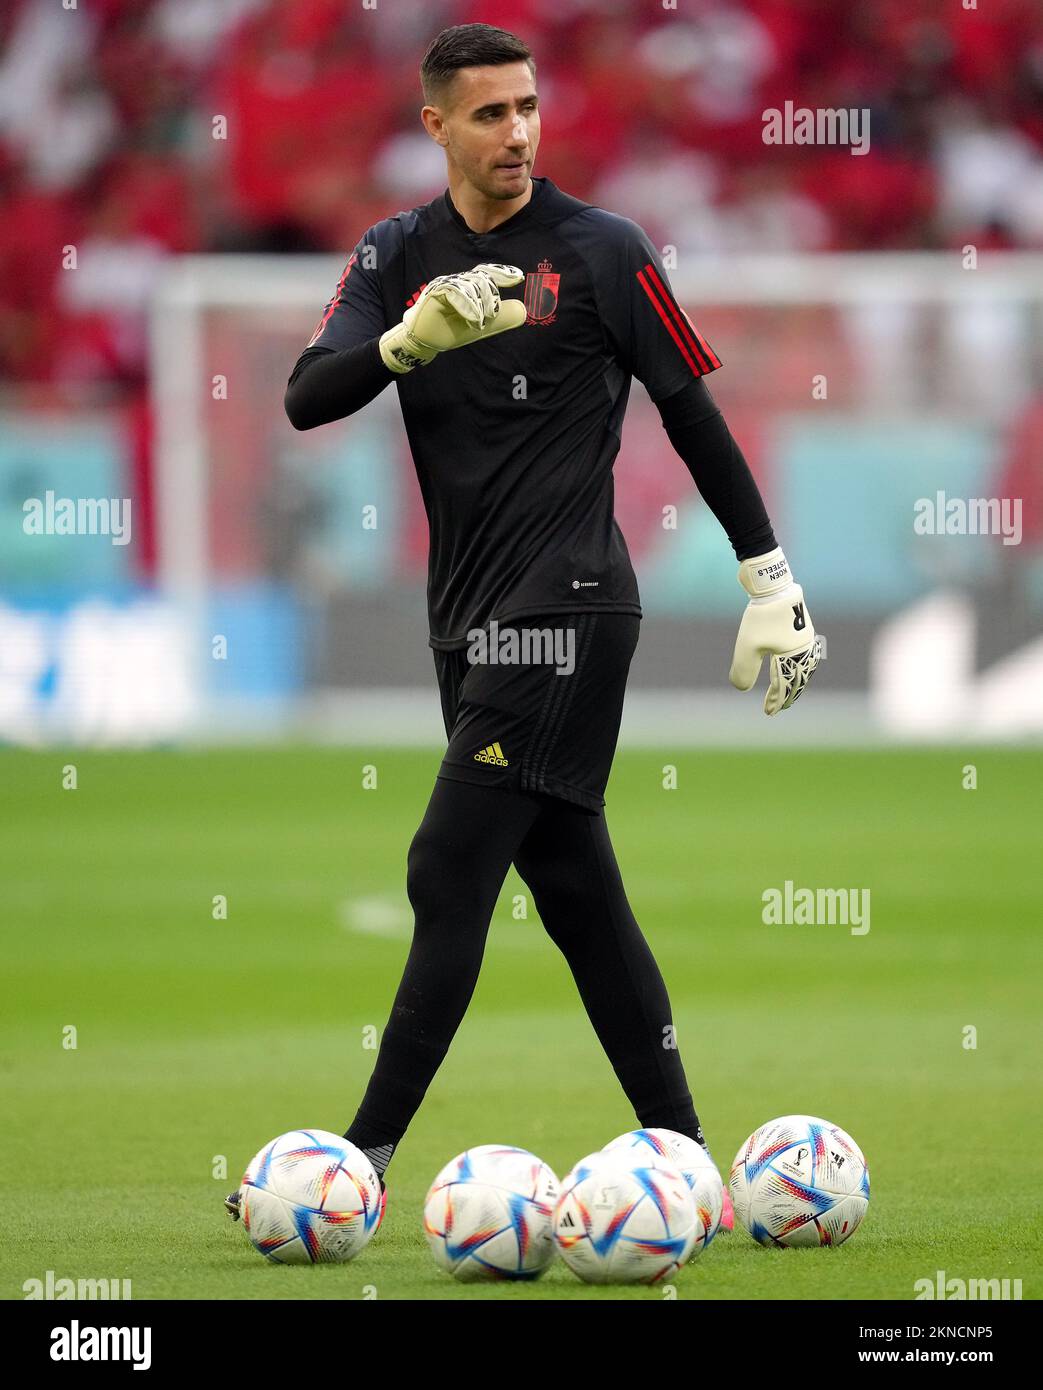 Belgium goalkeeper Koen Casteels during the FIFA World Cup Group F match at the Al Thumama Stadium, Doha, Qatar. Picture date: Sunday November 27, 2022. Stock Photo